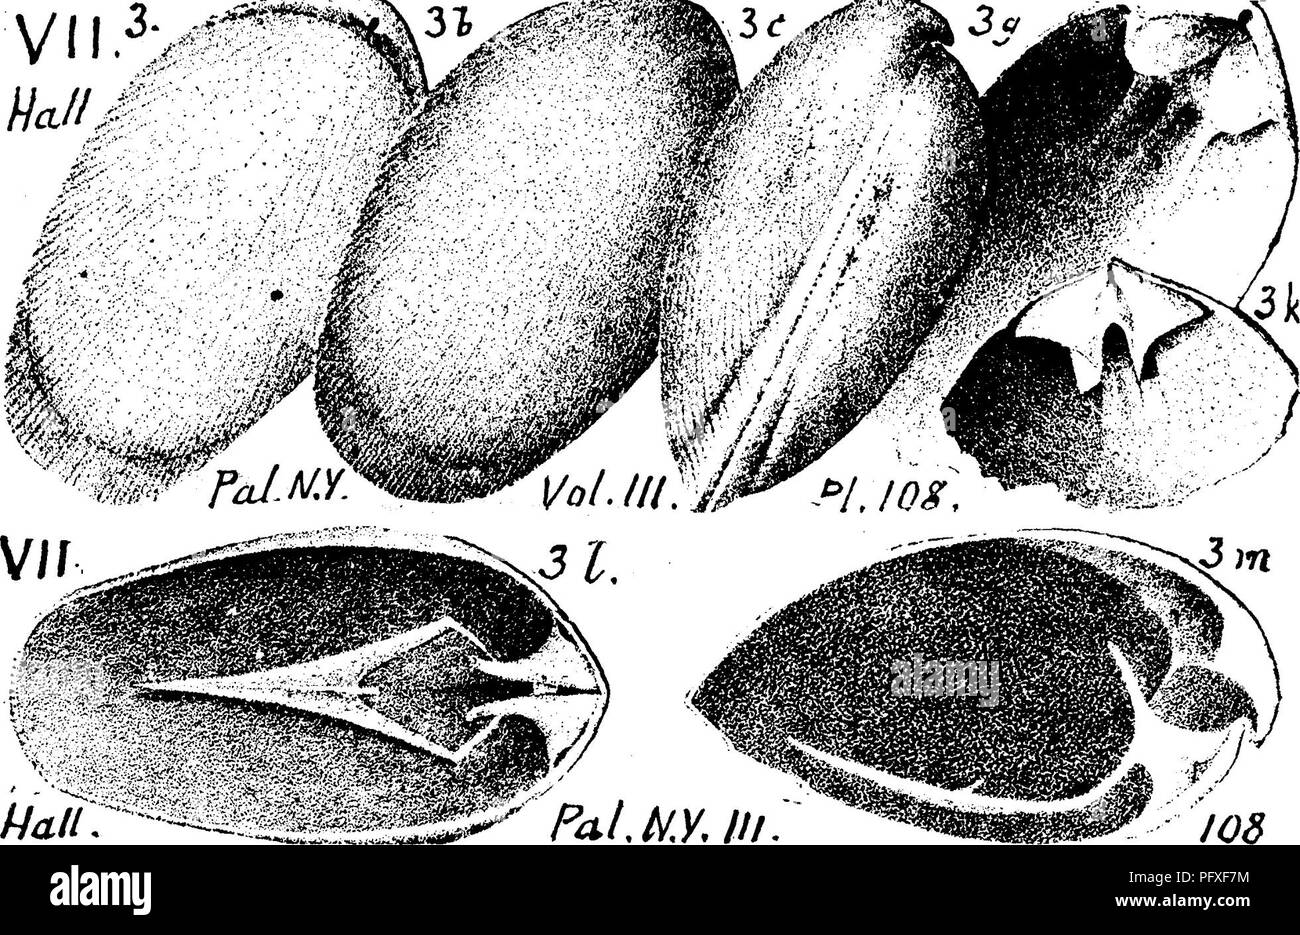 . A dictionary of the fossils of Pennsylvania and neighboring states named in the reports and catalogues of the survey ... Paleontology. 857 Rens. lected figs. 16, 17, dorsal and ventral views of a characteristic specimen somewhat larger than common; 18, unusual, broad, ventral valve; 19, dorsal cast, with muscular scars, dental cav- ities, etc., 20, ventral cast with scars, and hinge plate impres- sion. Characteristic radiating striae uf Rensselmria not ob- served. If a different genus. Hall proposed the name Rens- selandia. Found in an Upper Helderherg limestone at Water- loo, Iowa.—In Penns Stock Photo